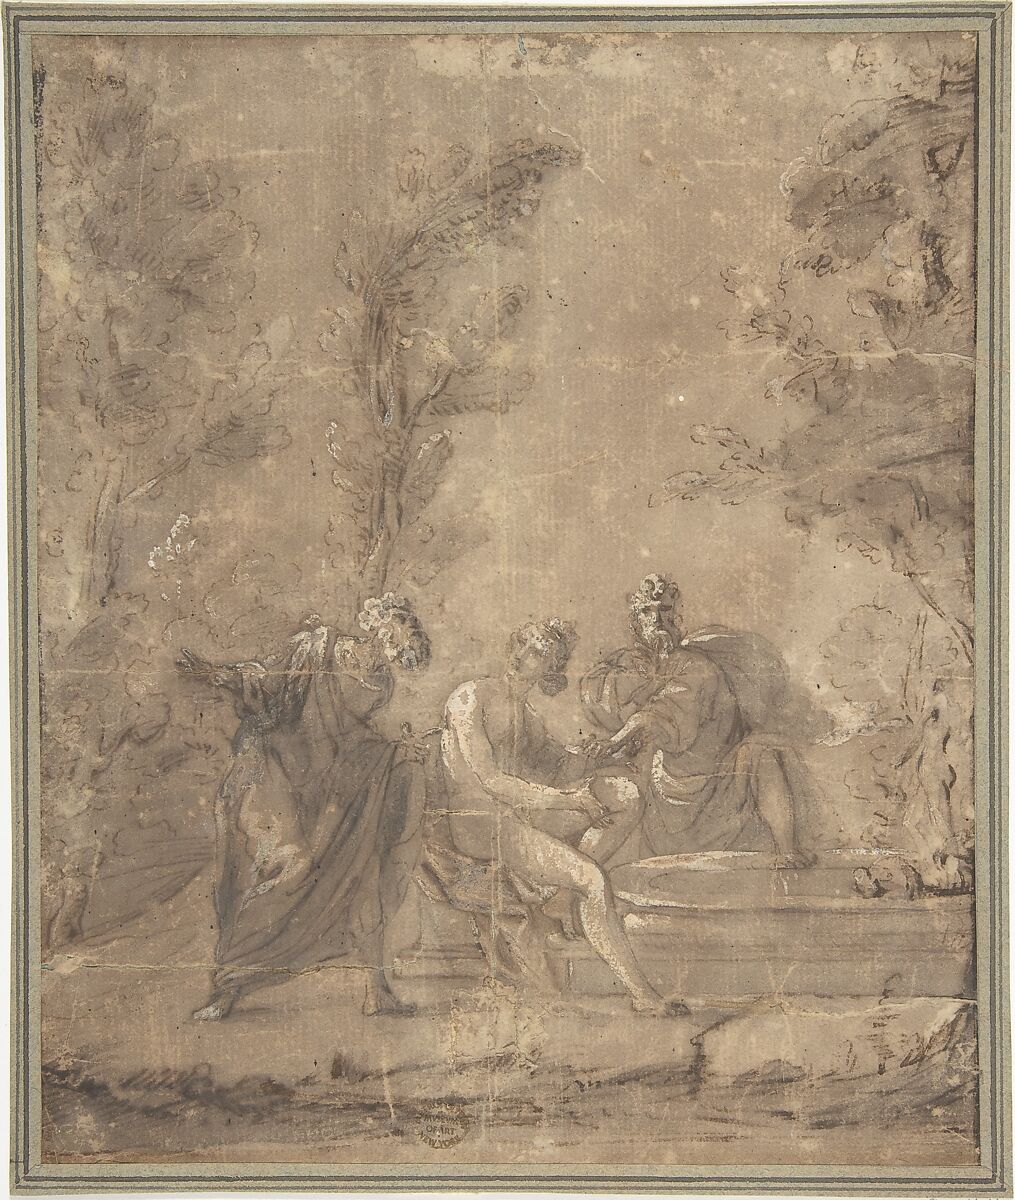 Susannah and the Elders, Anonymous, German, 19th century, Pen and bistre, washed and touched with white 